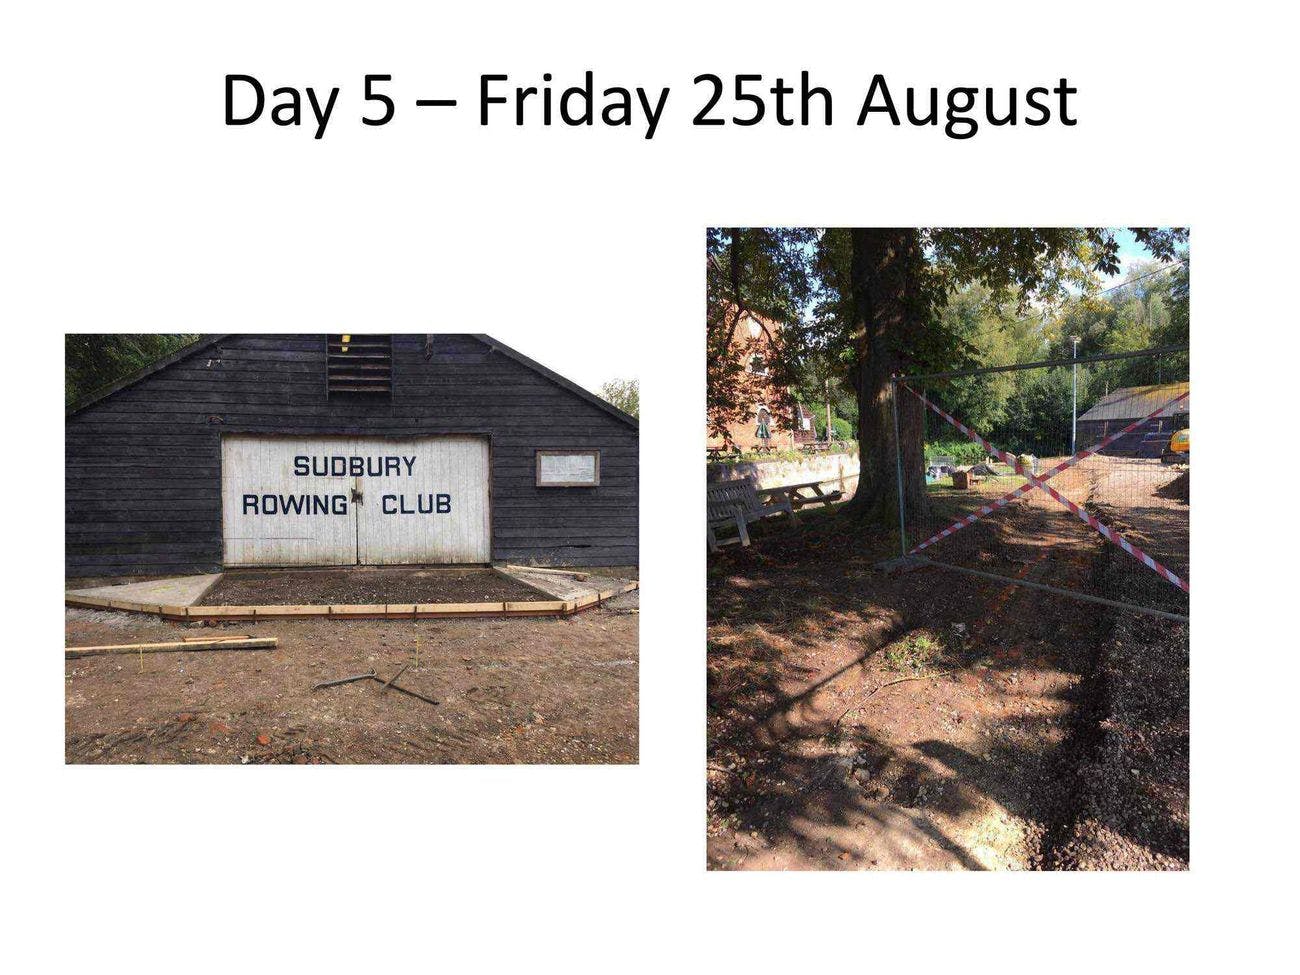 Day 5 – Friday 25th August